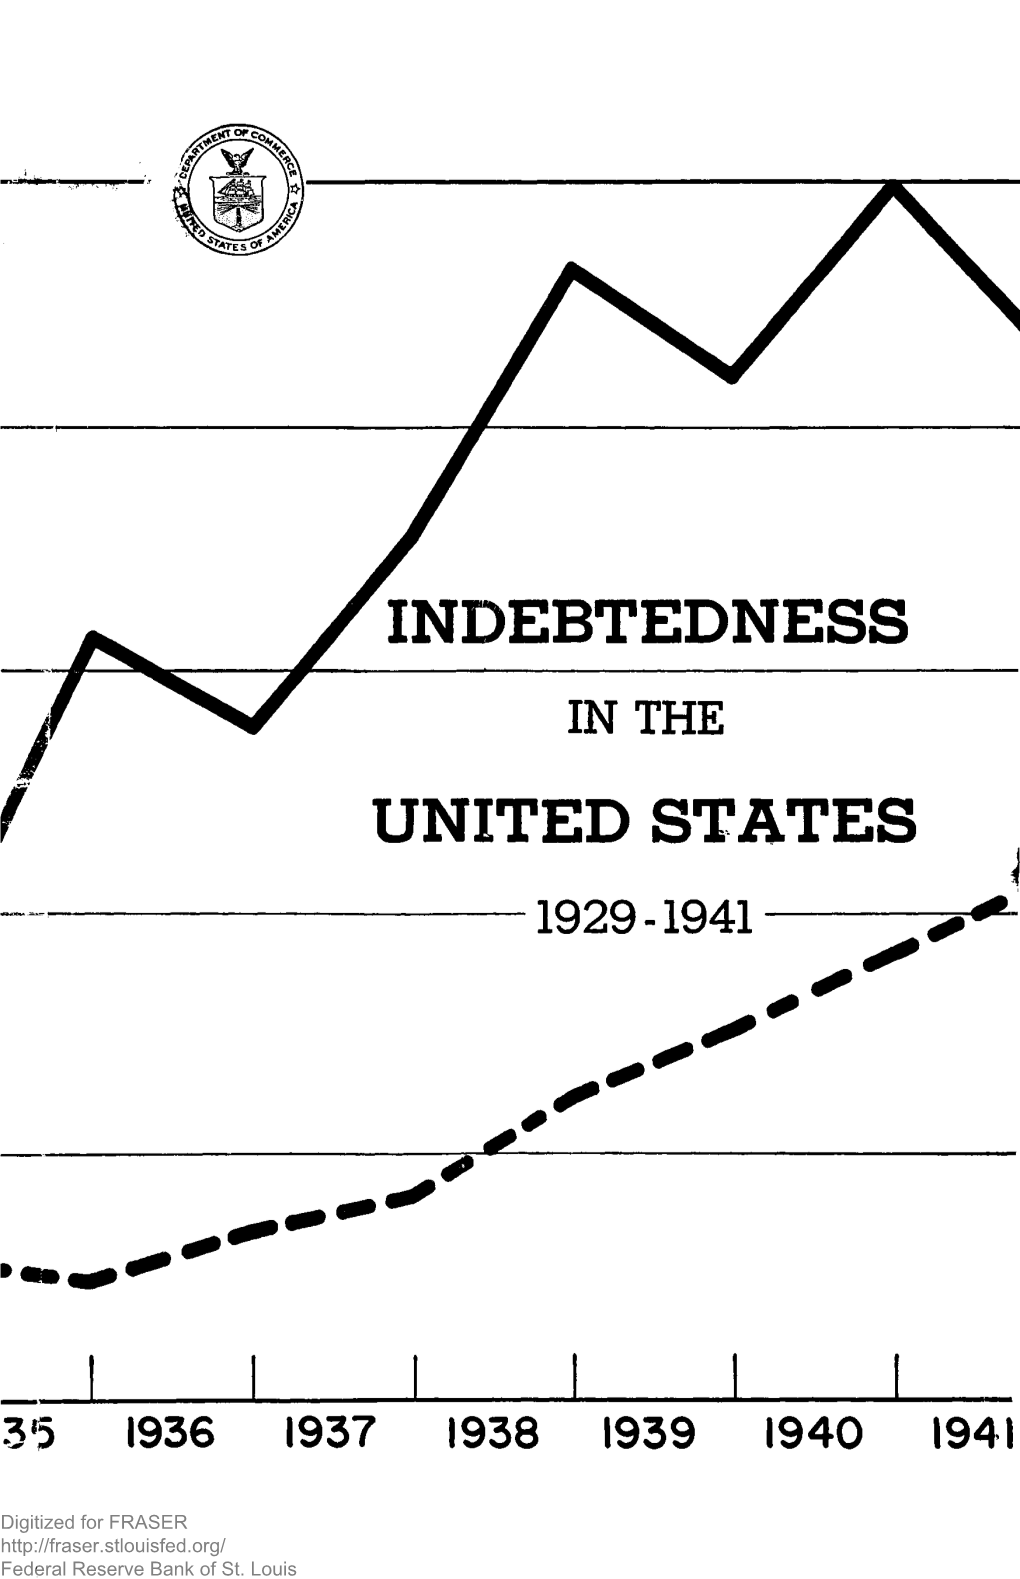 Indebtedness in the United States, 1929-41